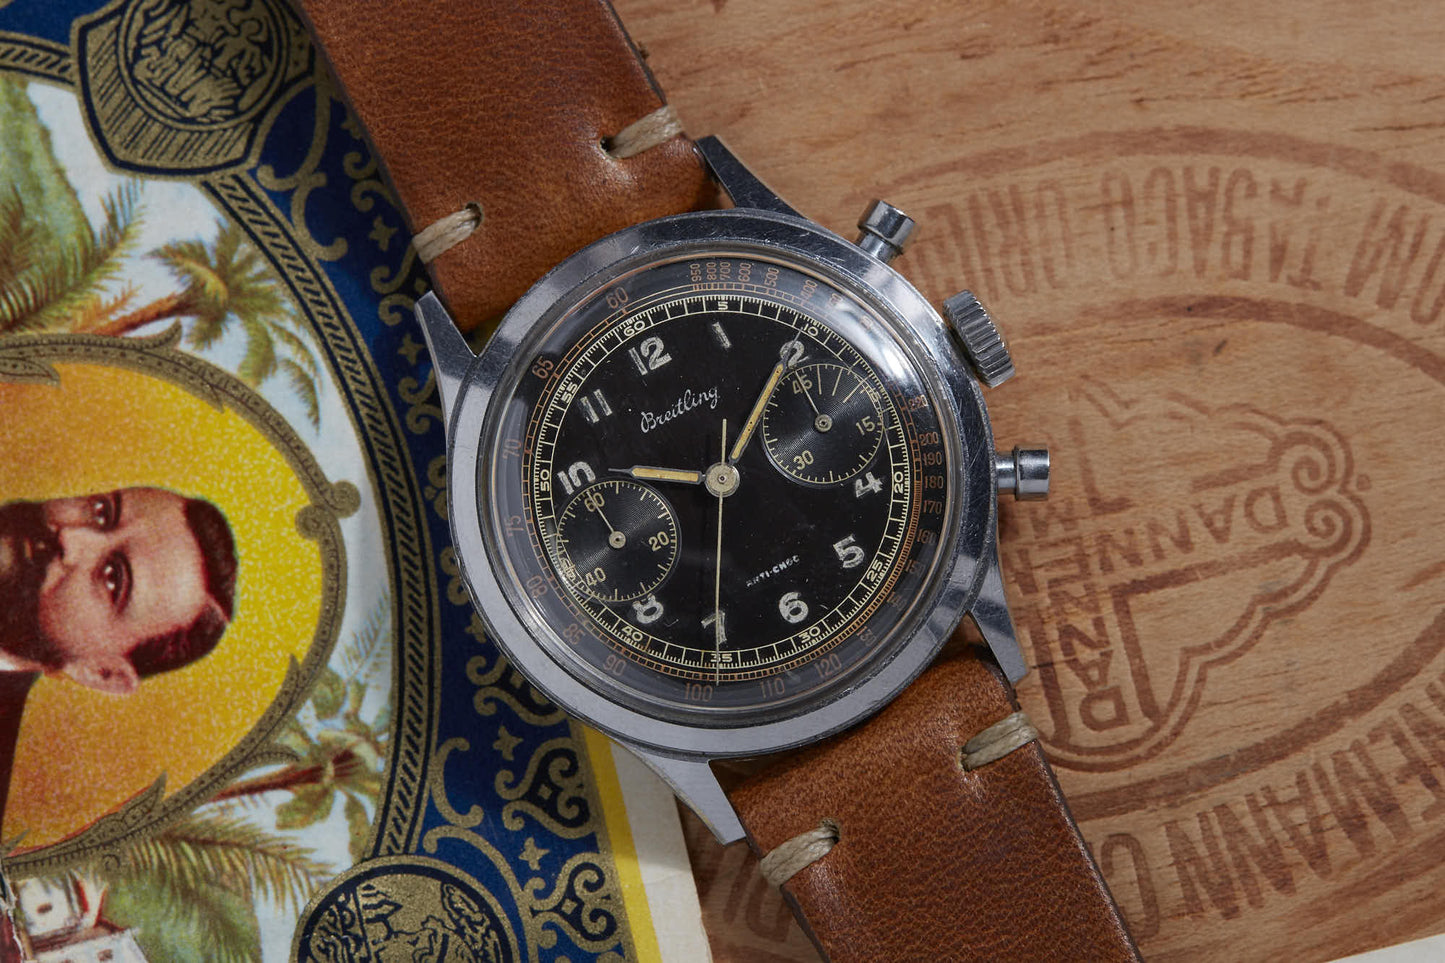 Breitling Reference 777 Chronograph